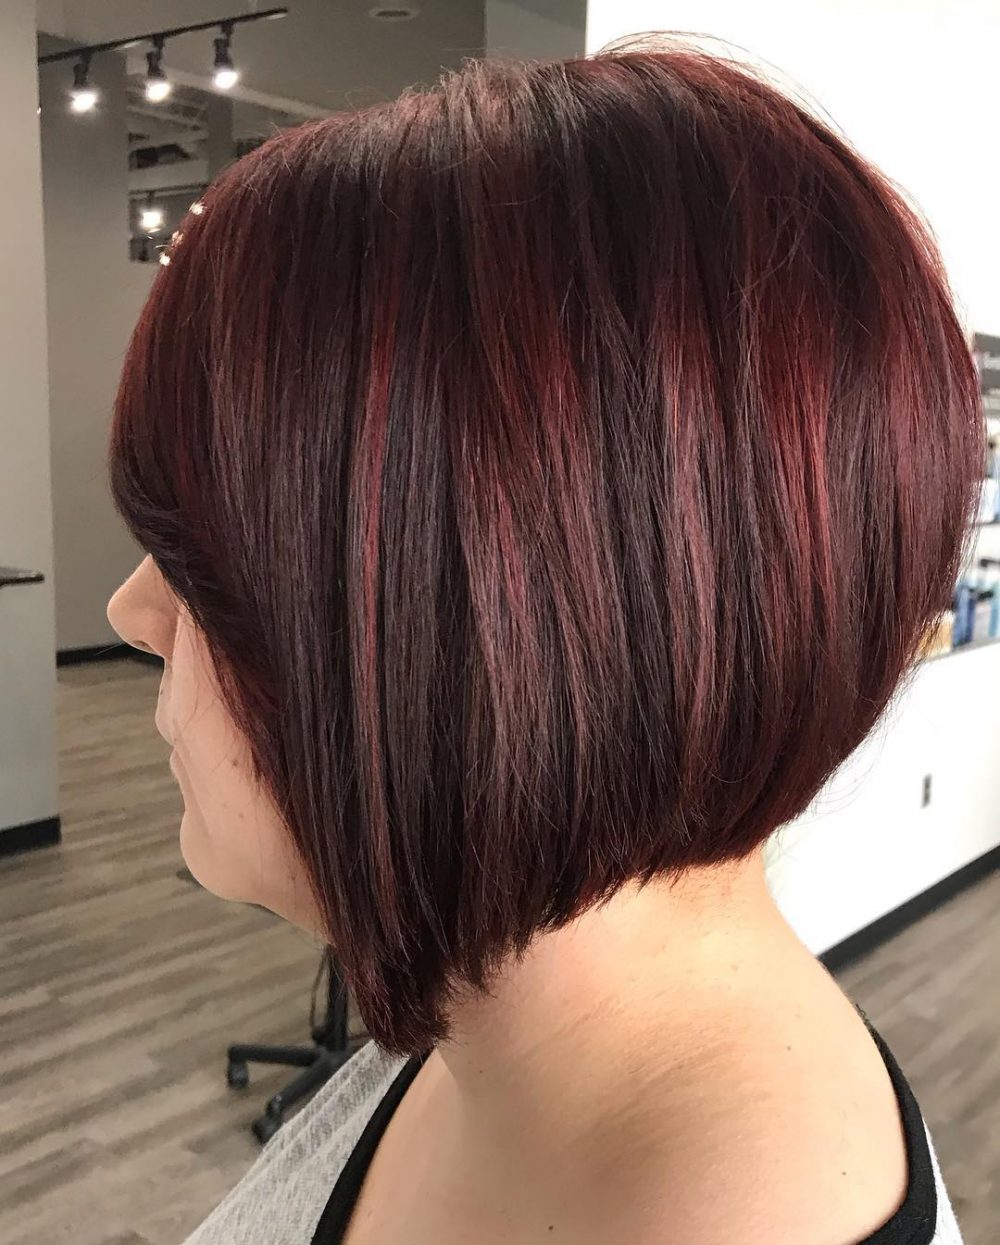 Dark Brown Hair with Red Highlights